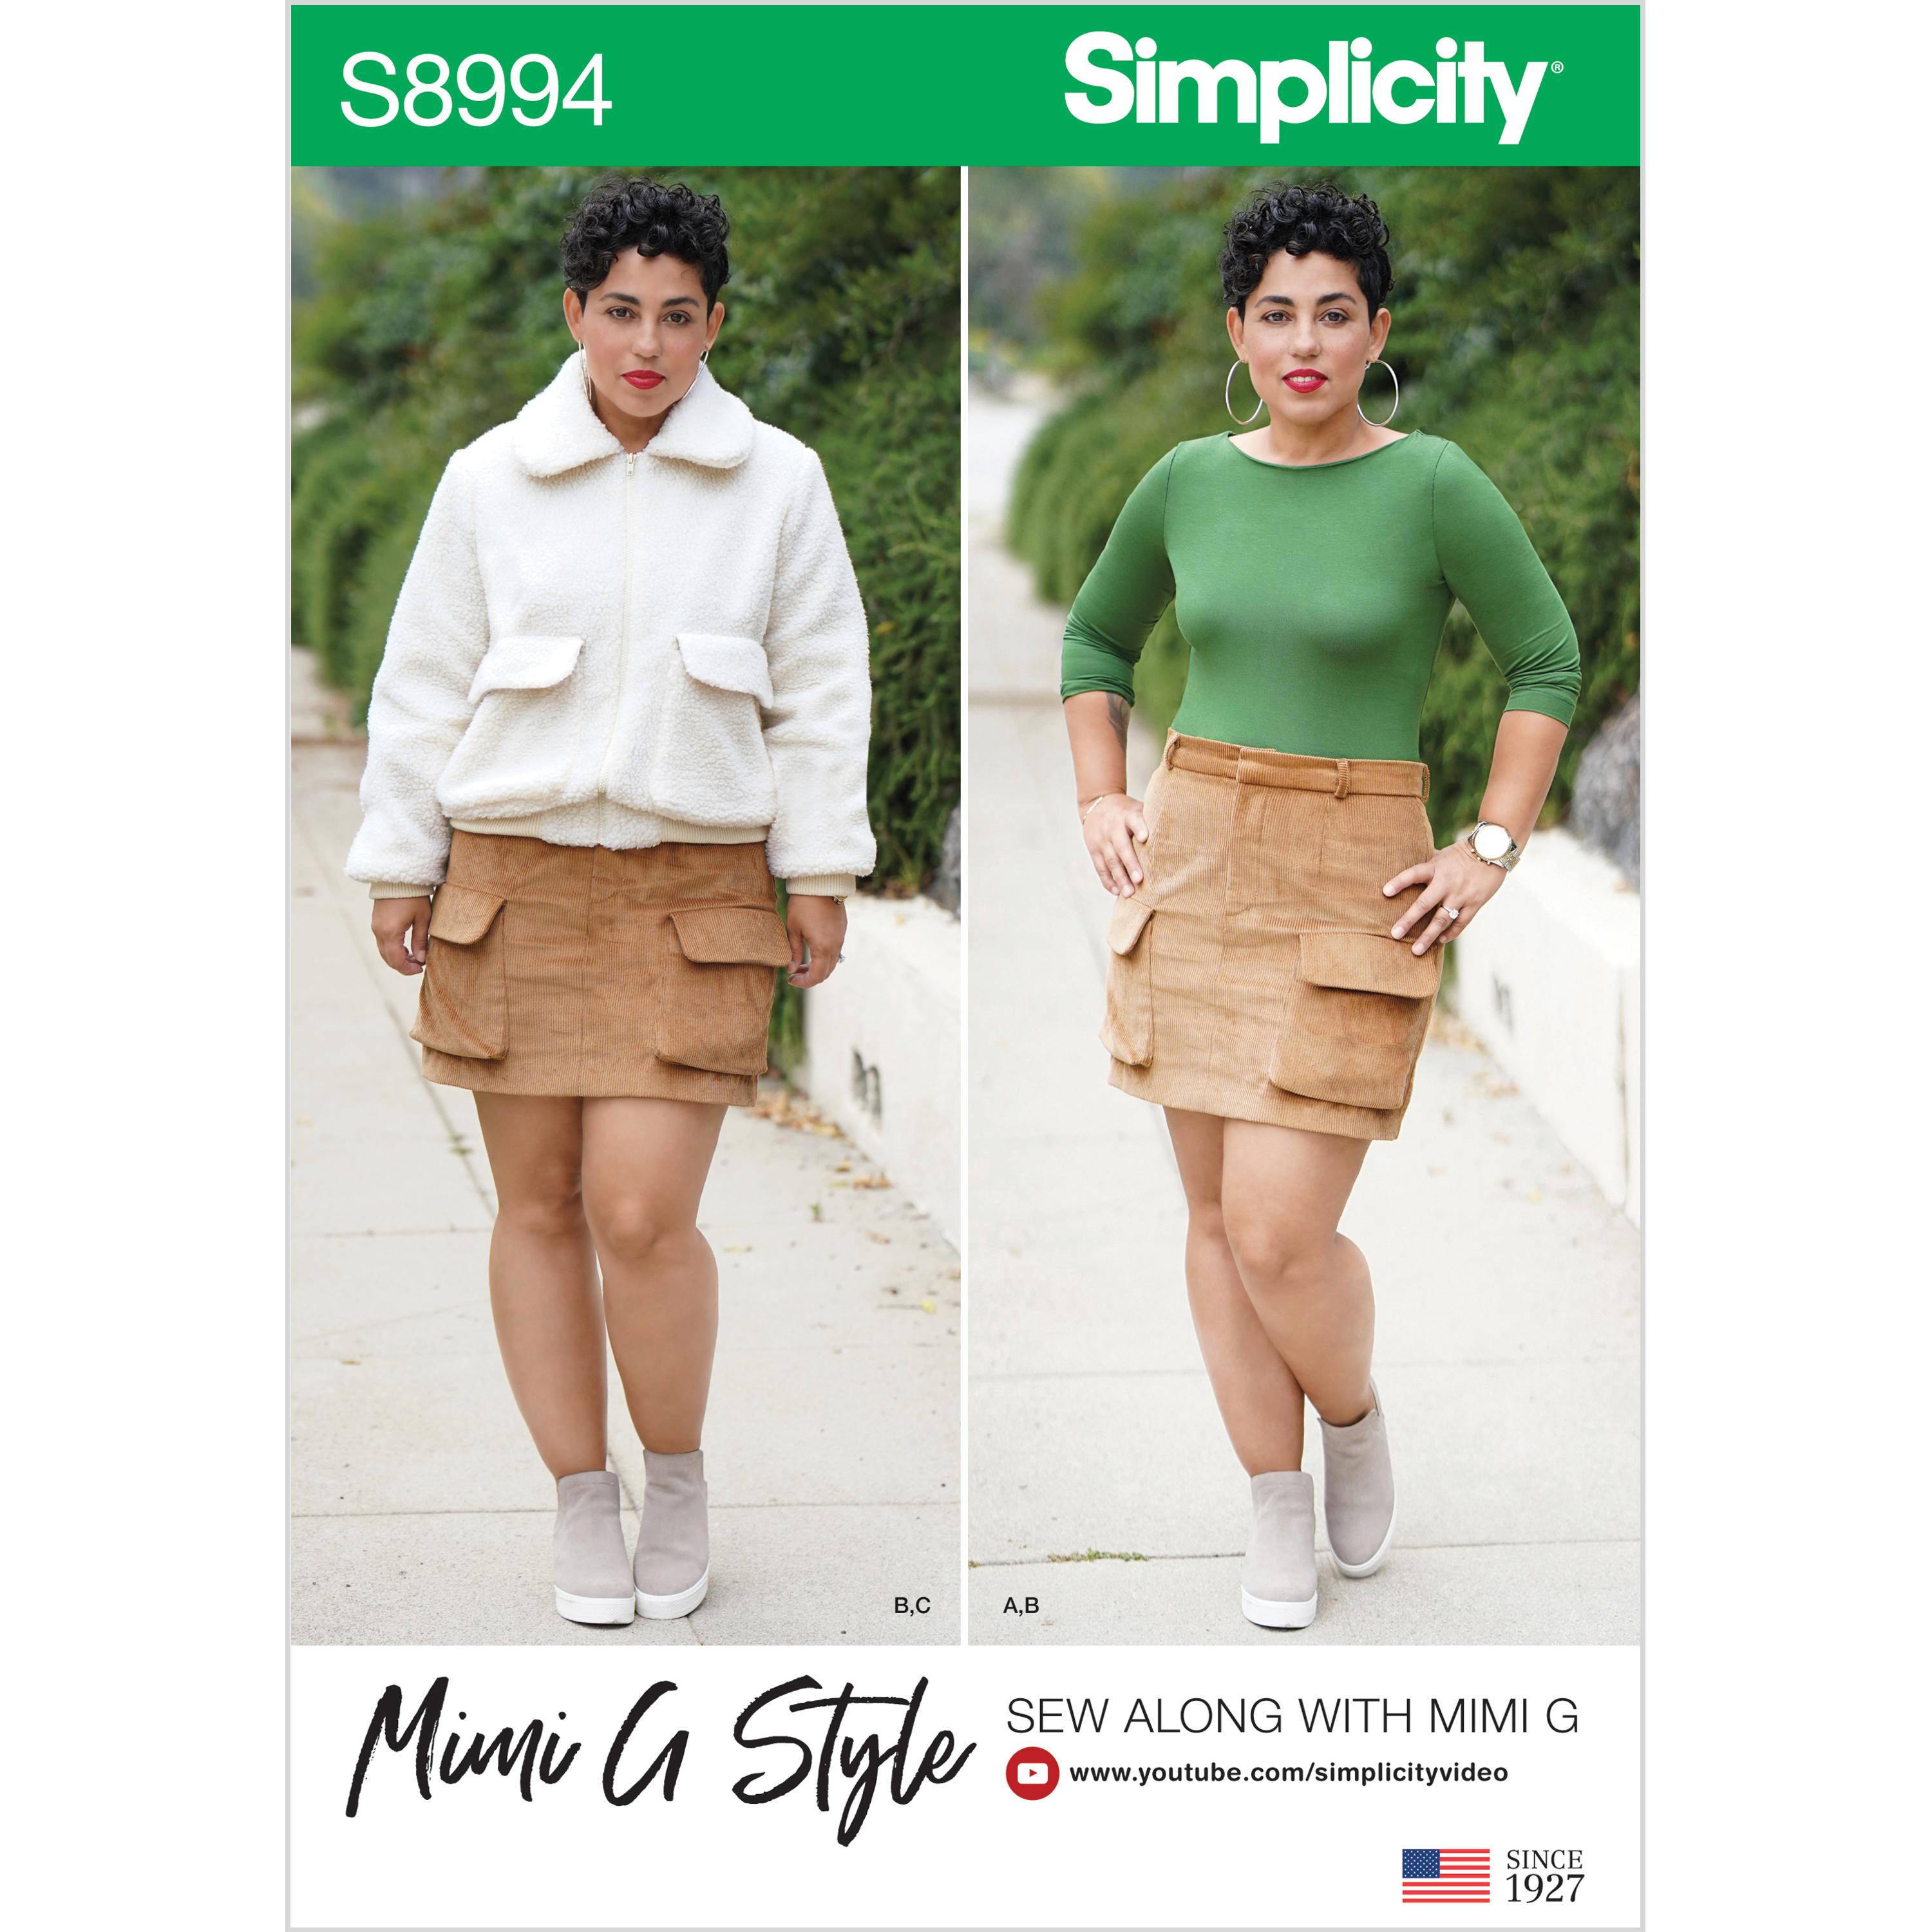 Simplicity S8994 Misses' Mimi G Style Jacket, Skirt, and Knit Top